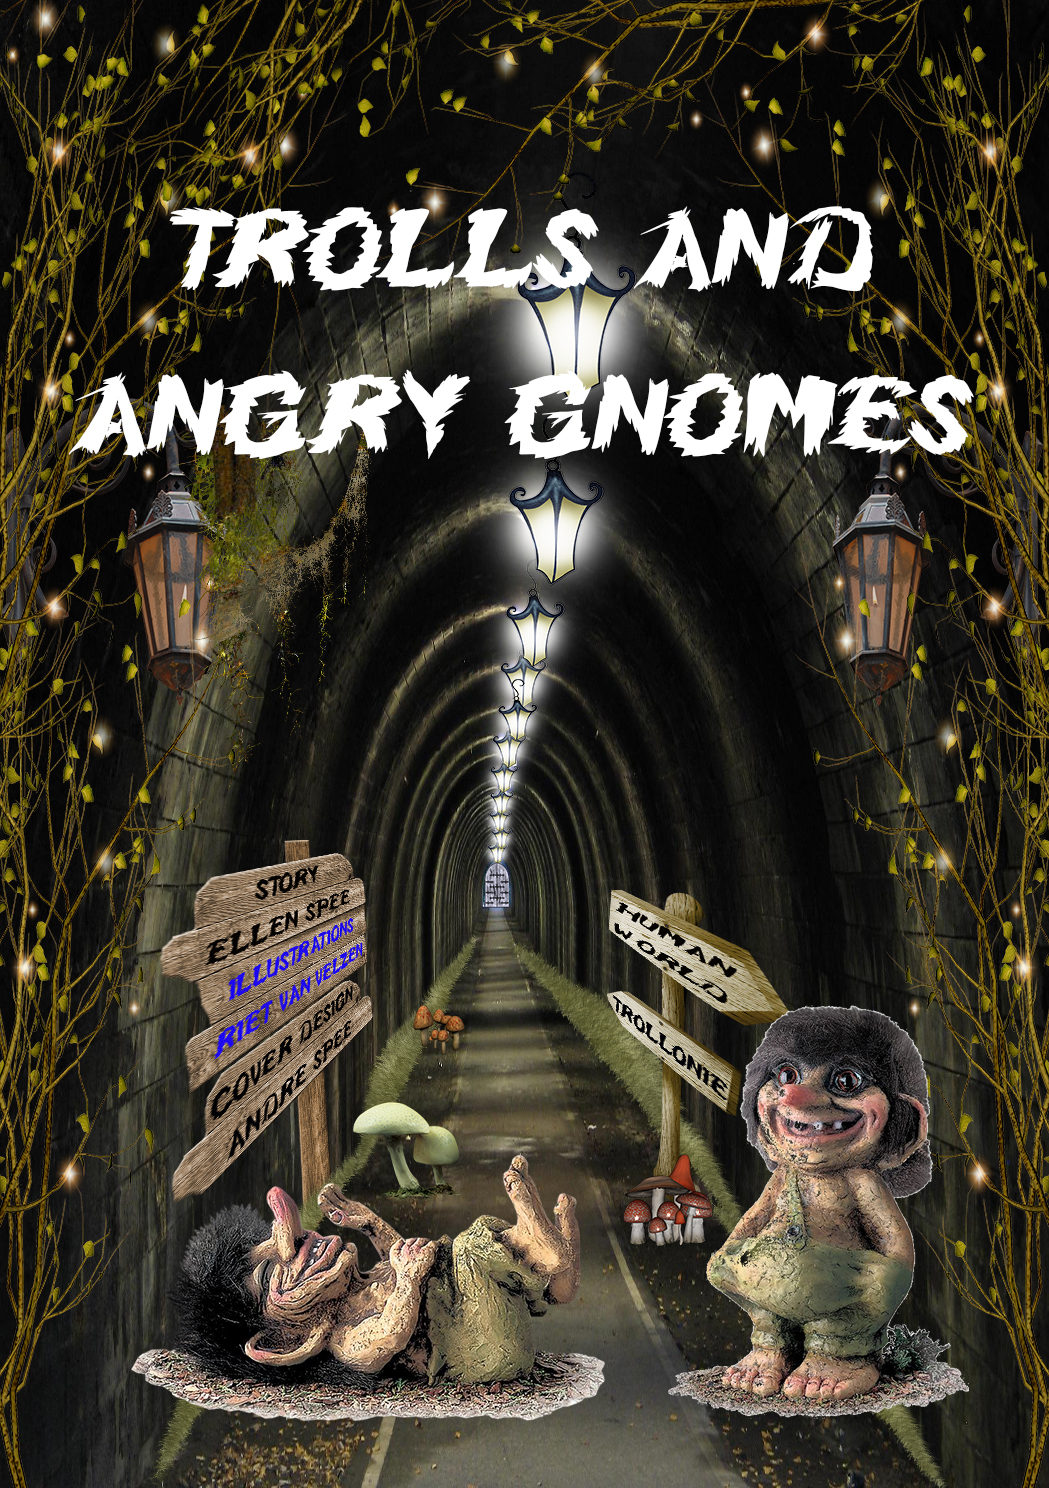 Trolls and angry gnomes (Ebook)